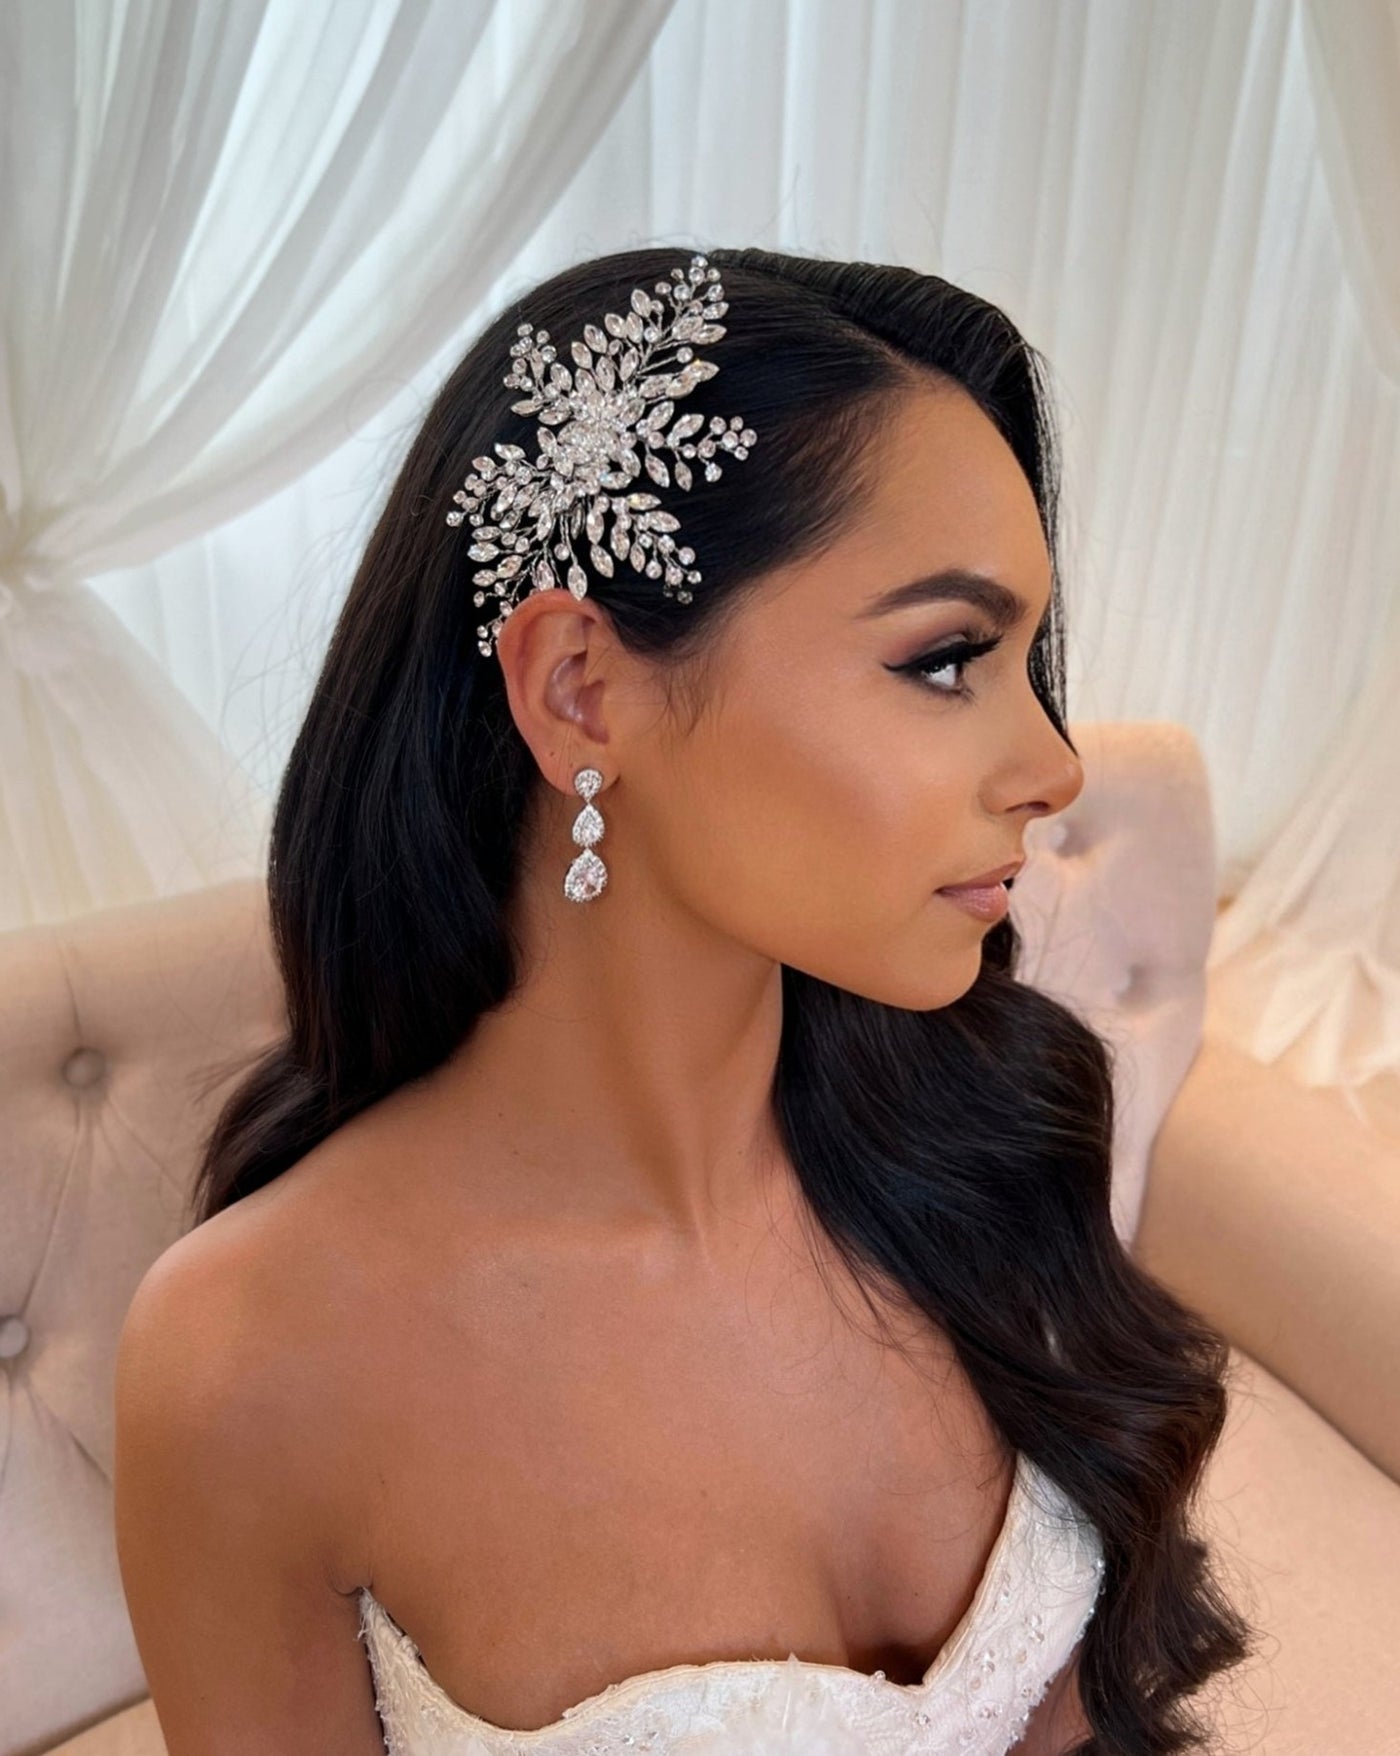 female model wearing bridal hair comb with various sprigs of crystals